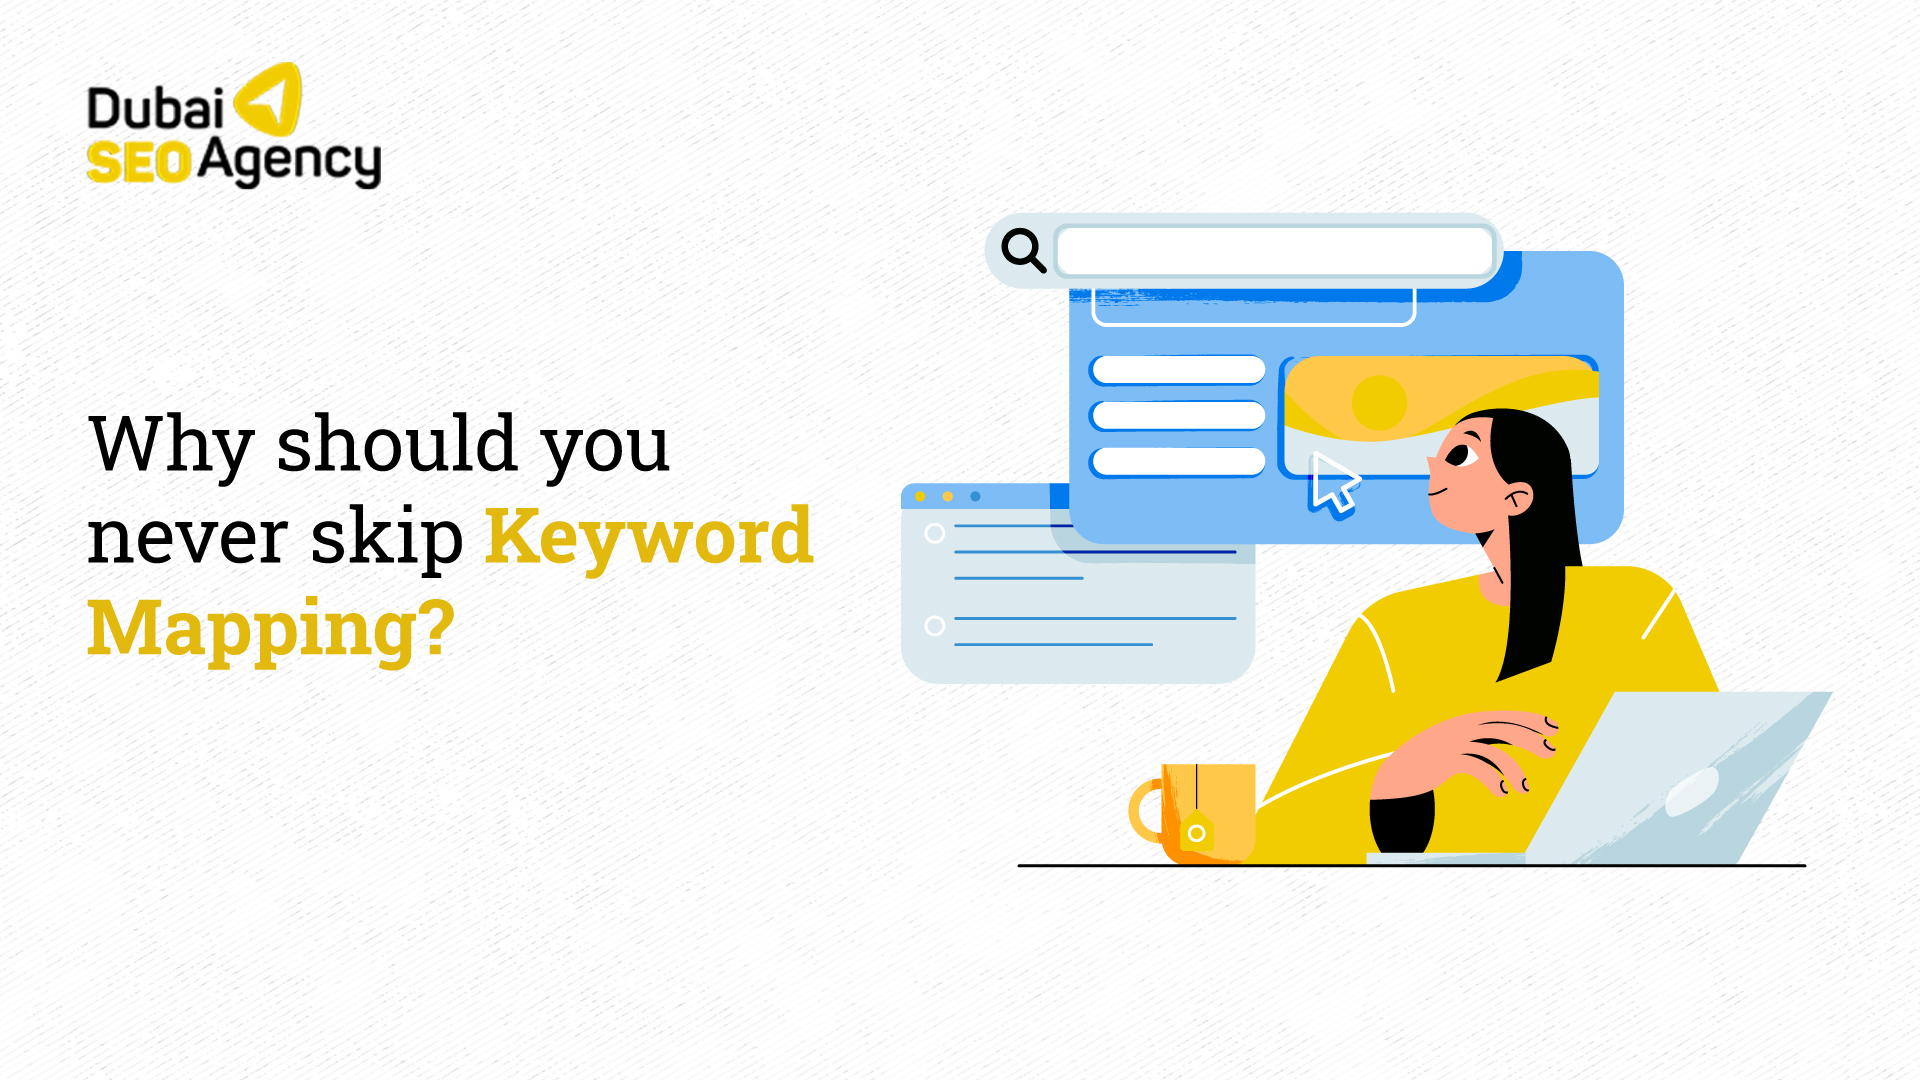 Why should you never skip keyword mapping?